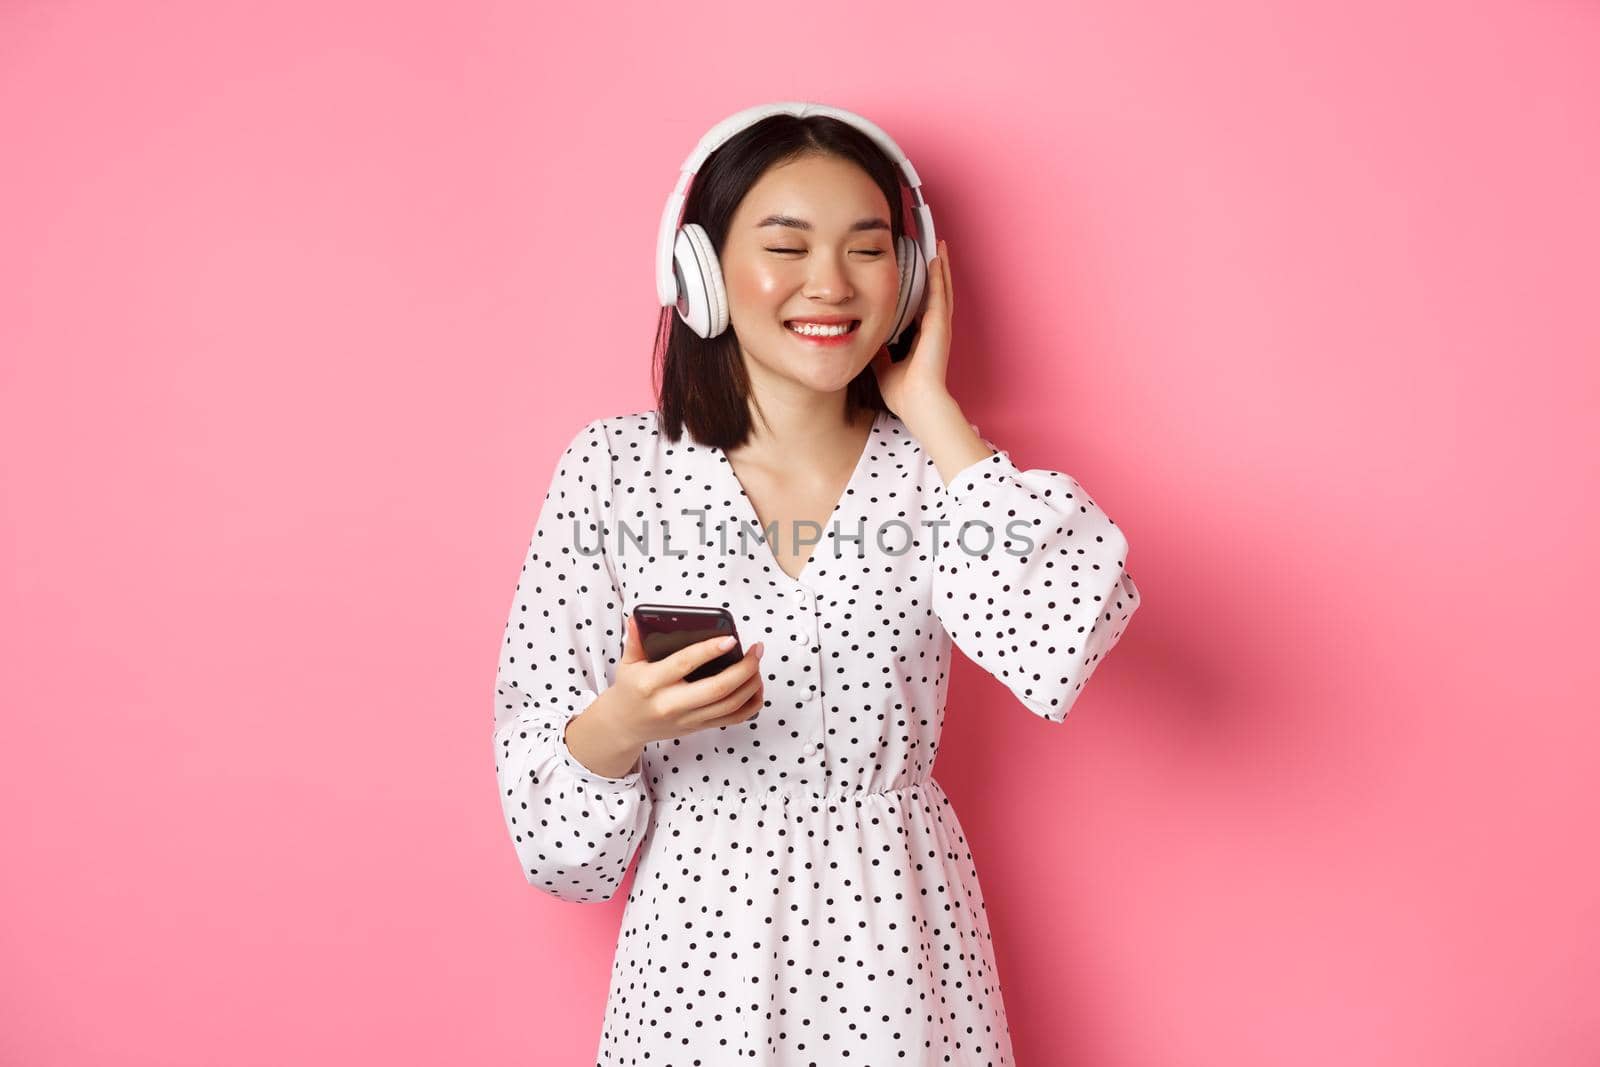 Romantic asian girl listening music in headphones, smiling with closed eyes, holding mobile phone, standing over pink background.